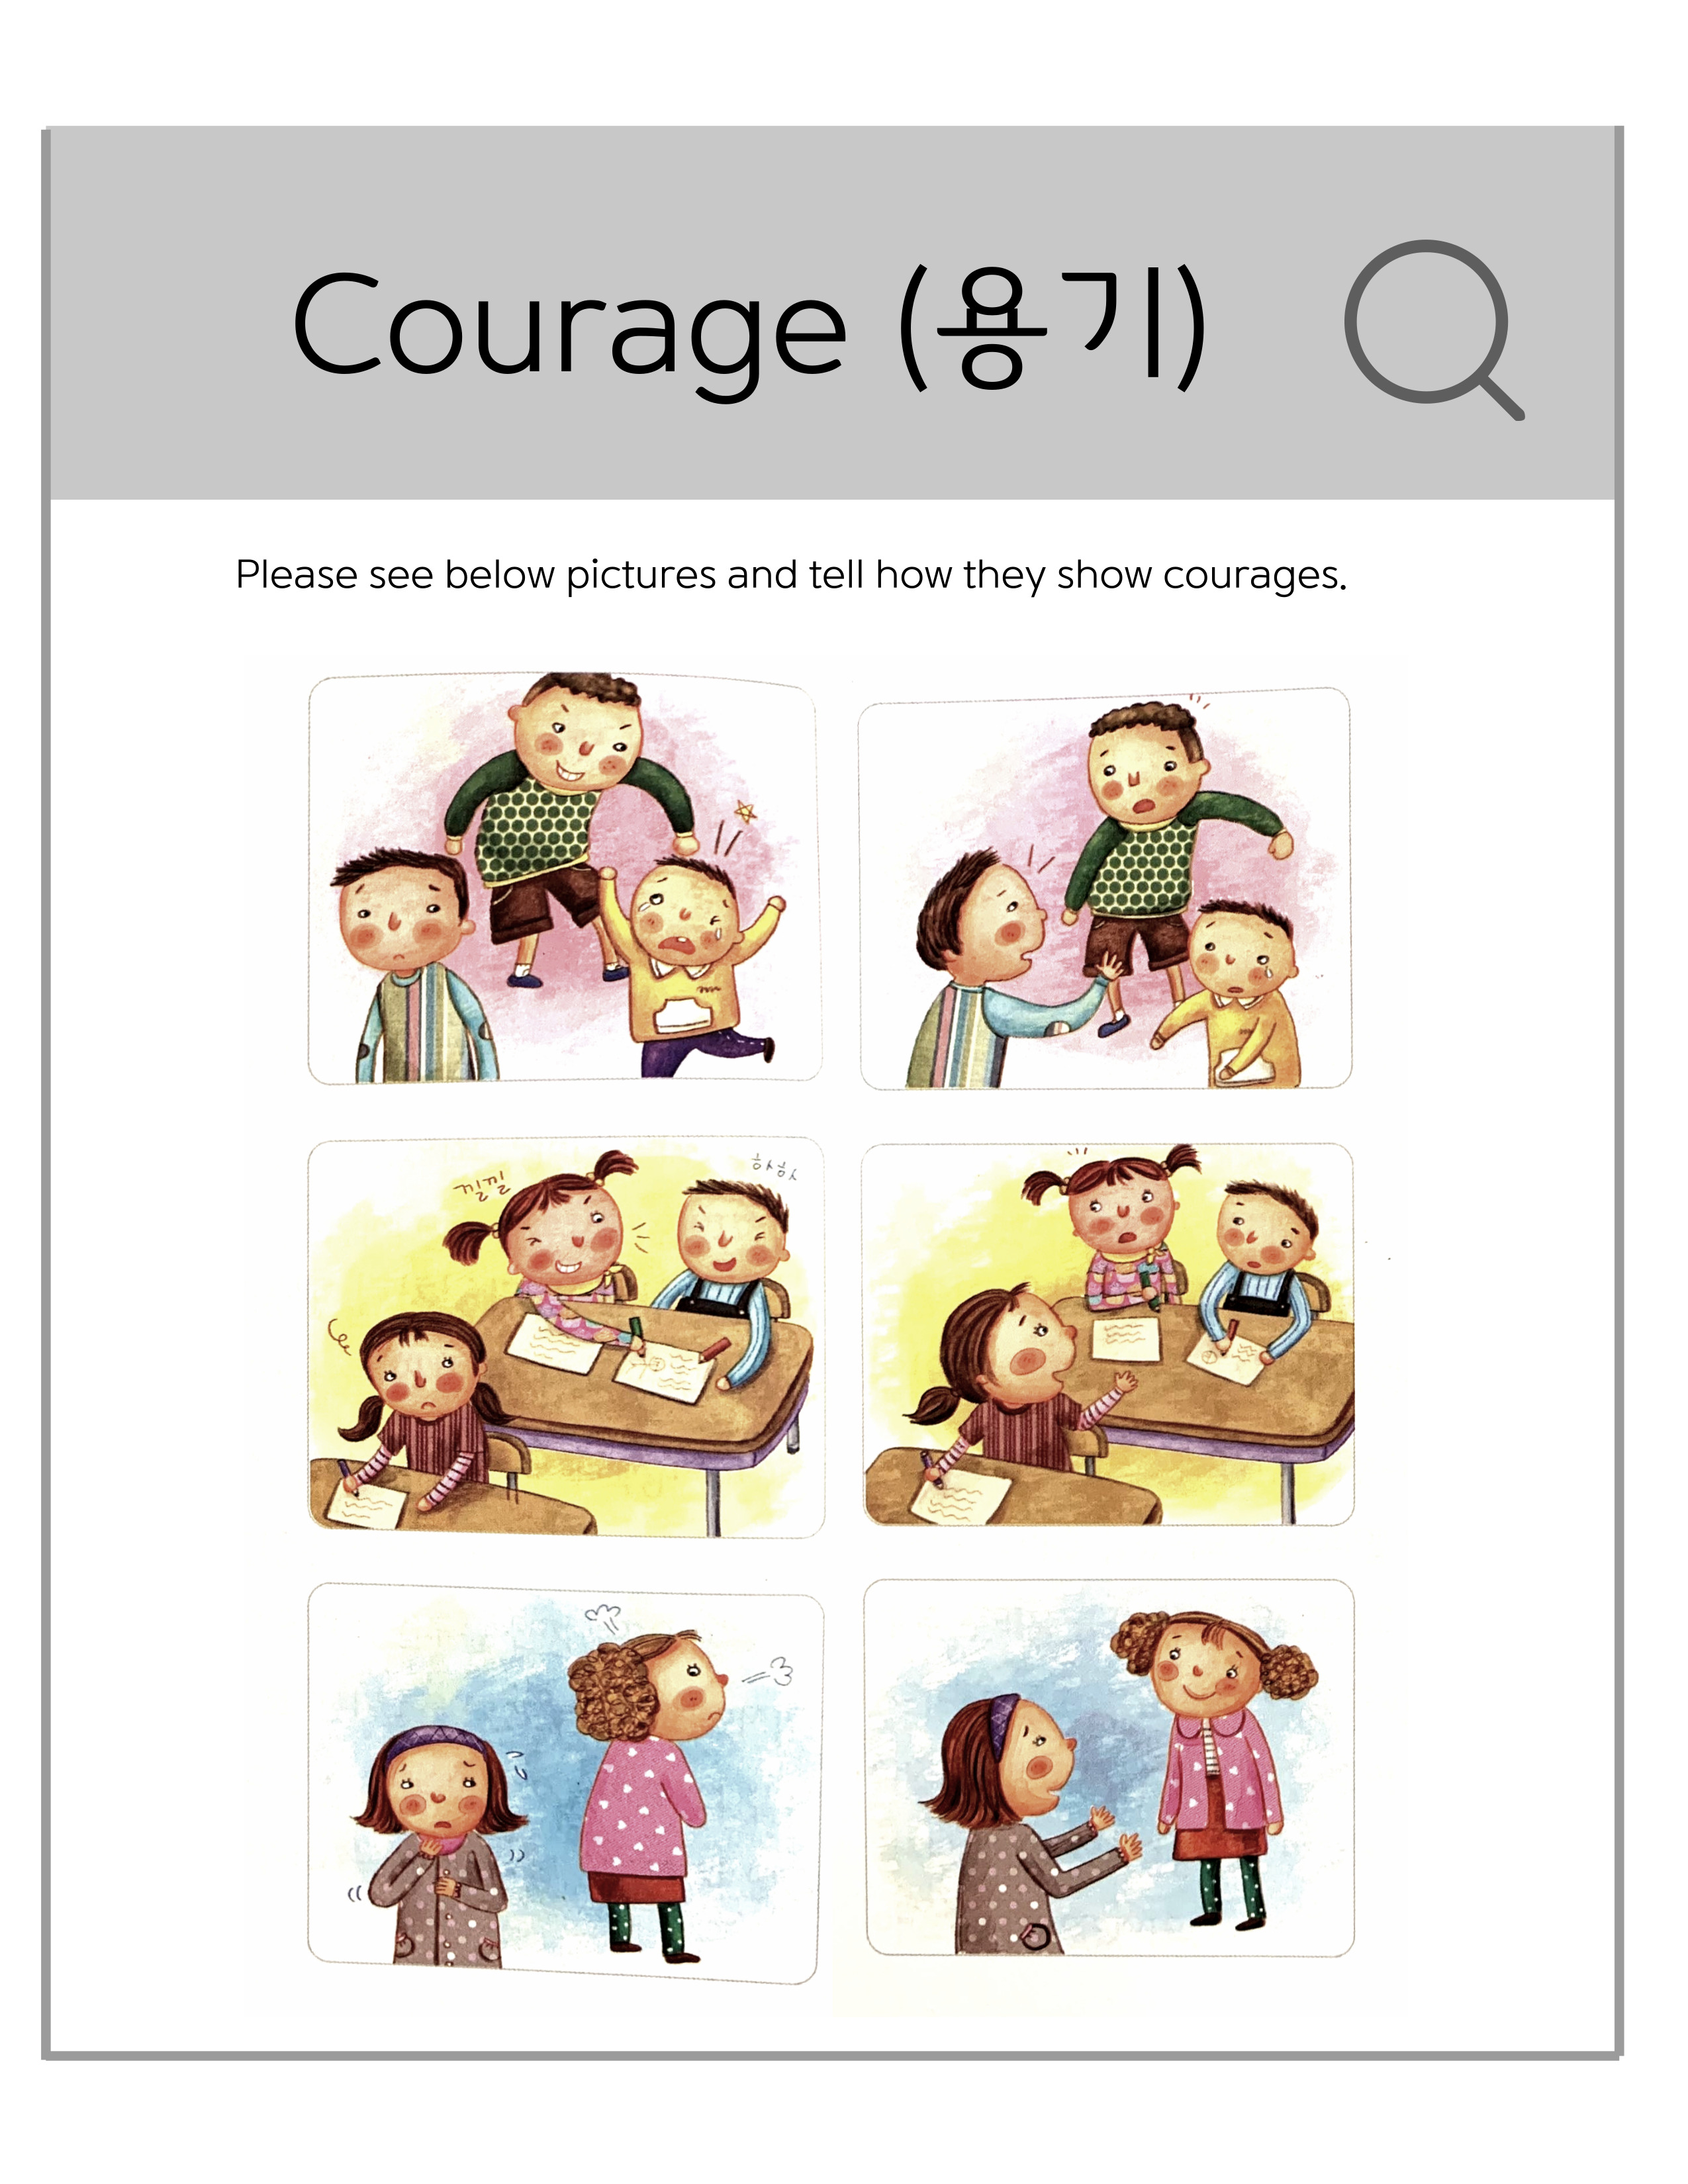 4. Showing courage.jpg